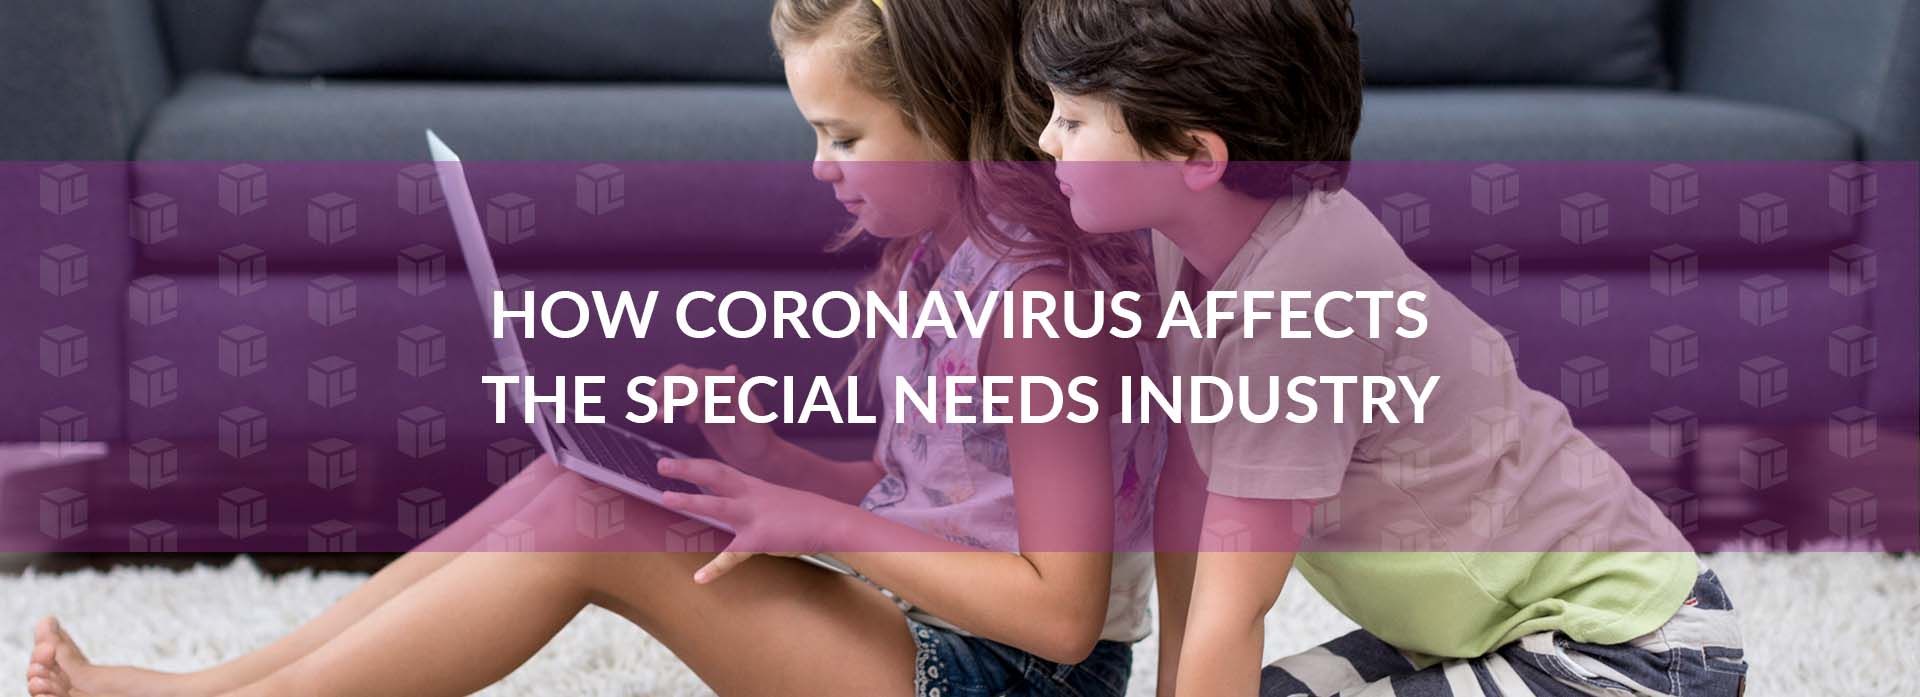 How coronavirus affects the special needs industry